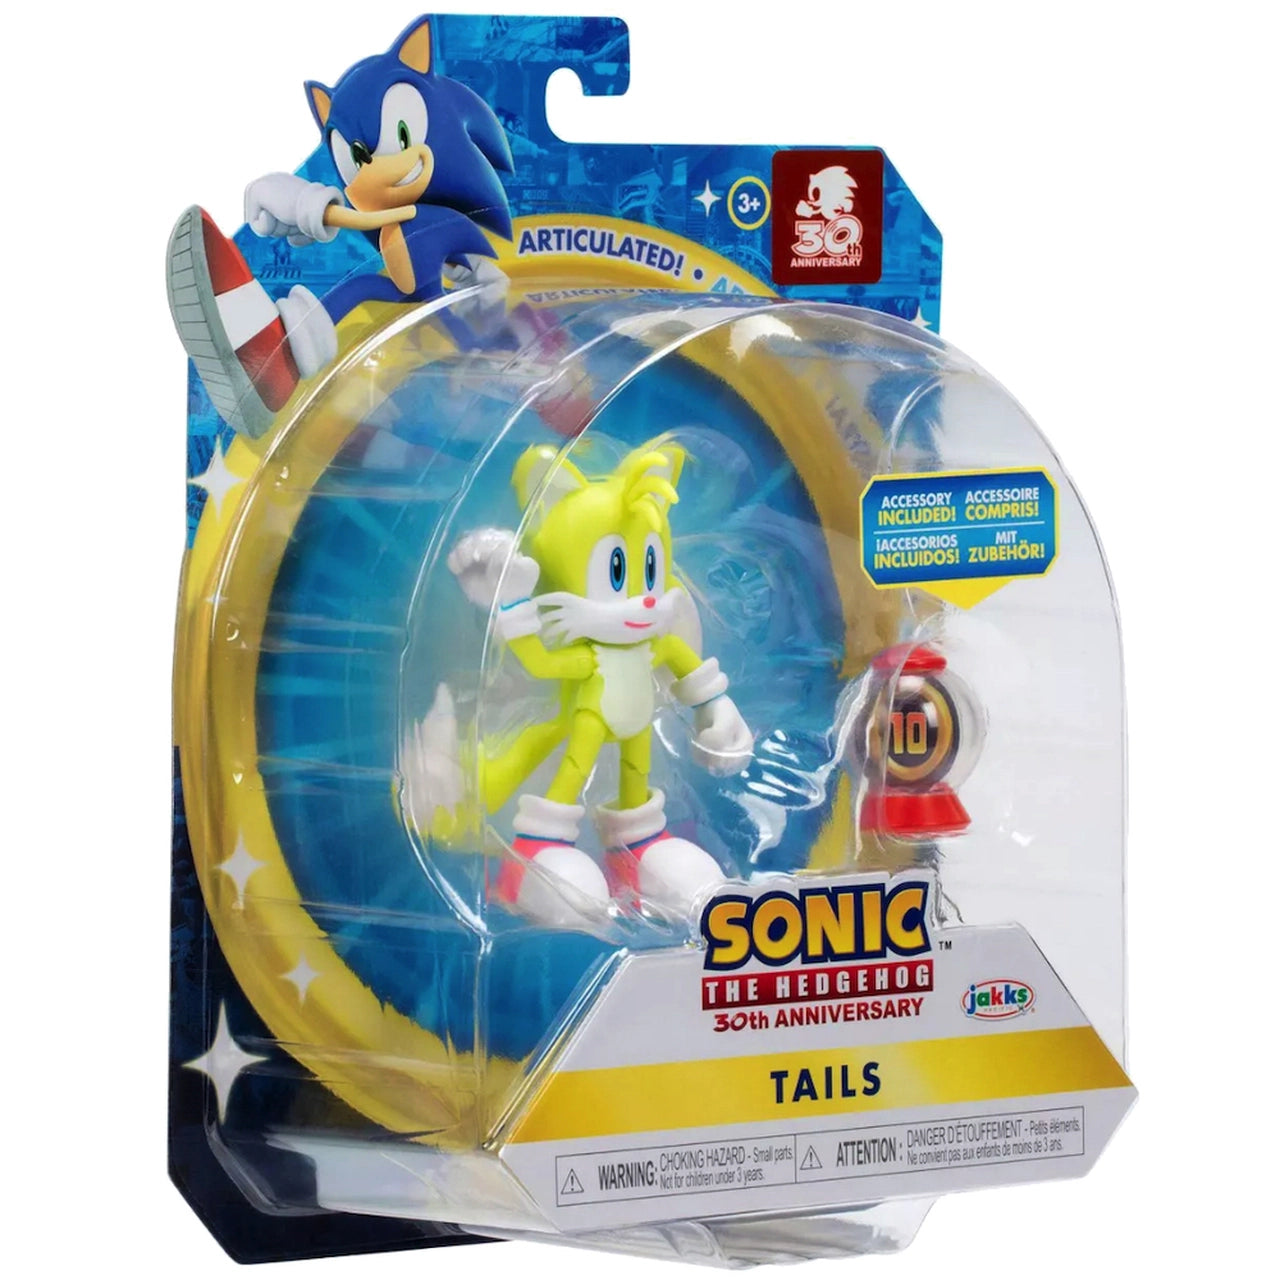 Sonic the Hedgehog 4" Figure: Tails 30th Anniversary